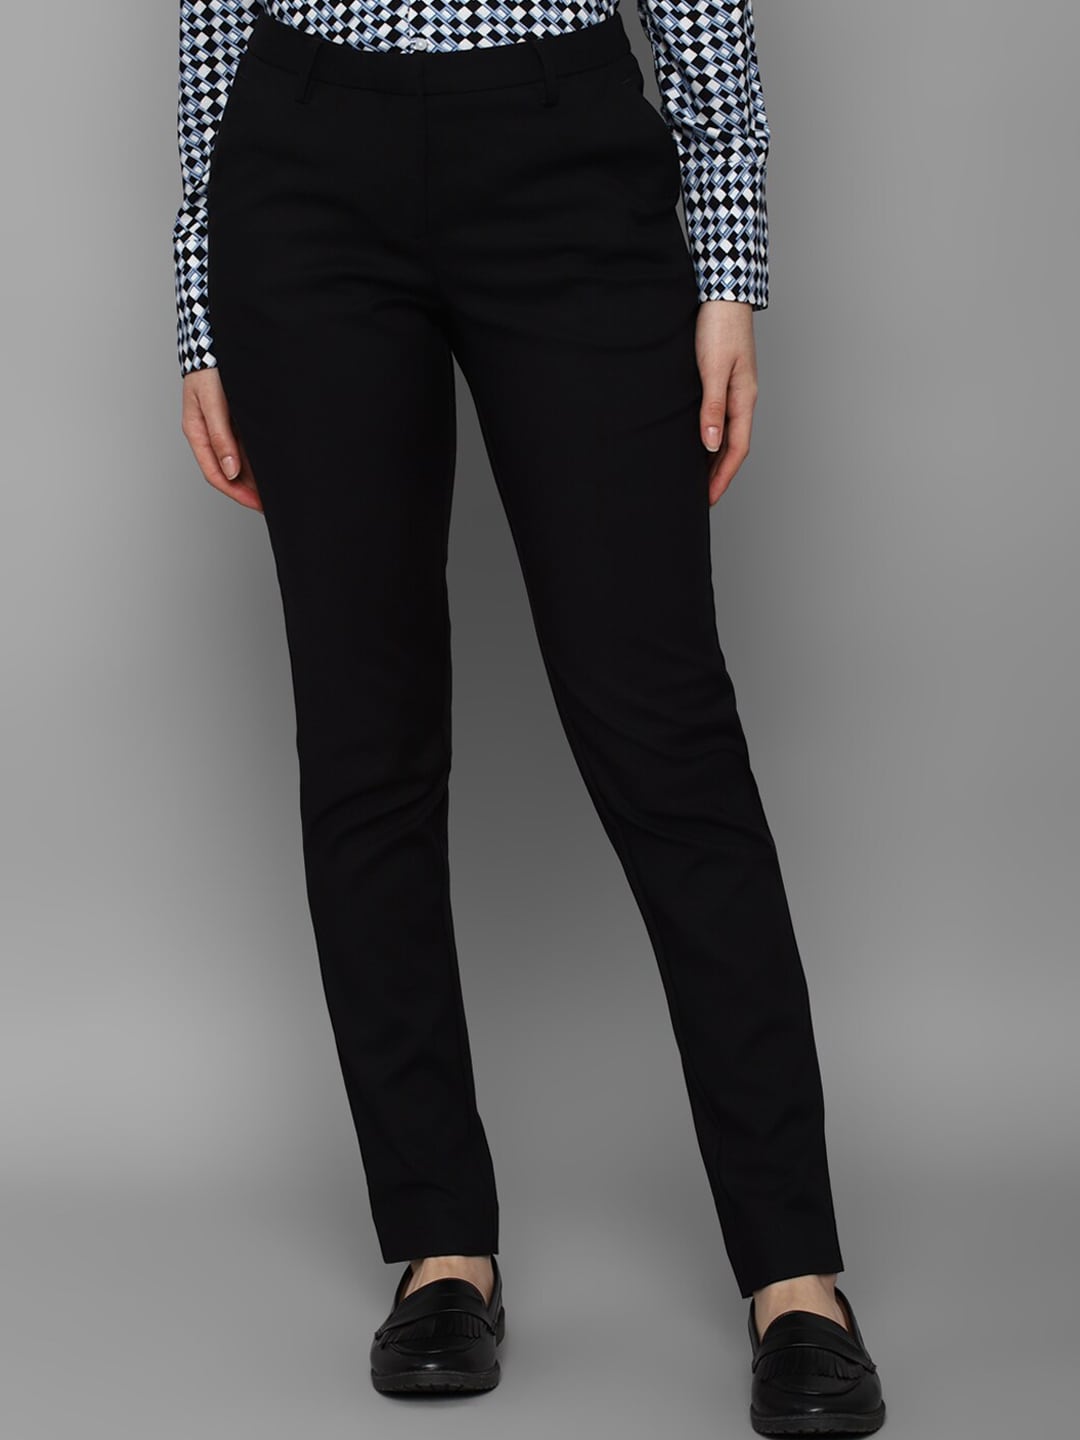 Allen Solly Woman Women Black Trousers Price in India